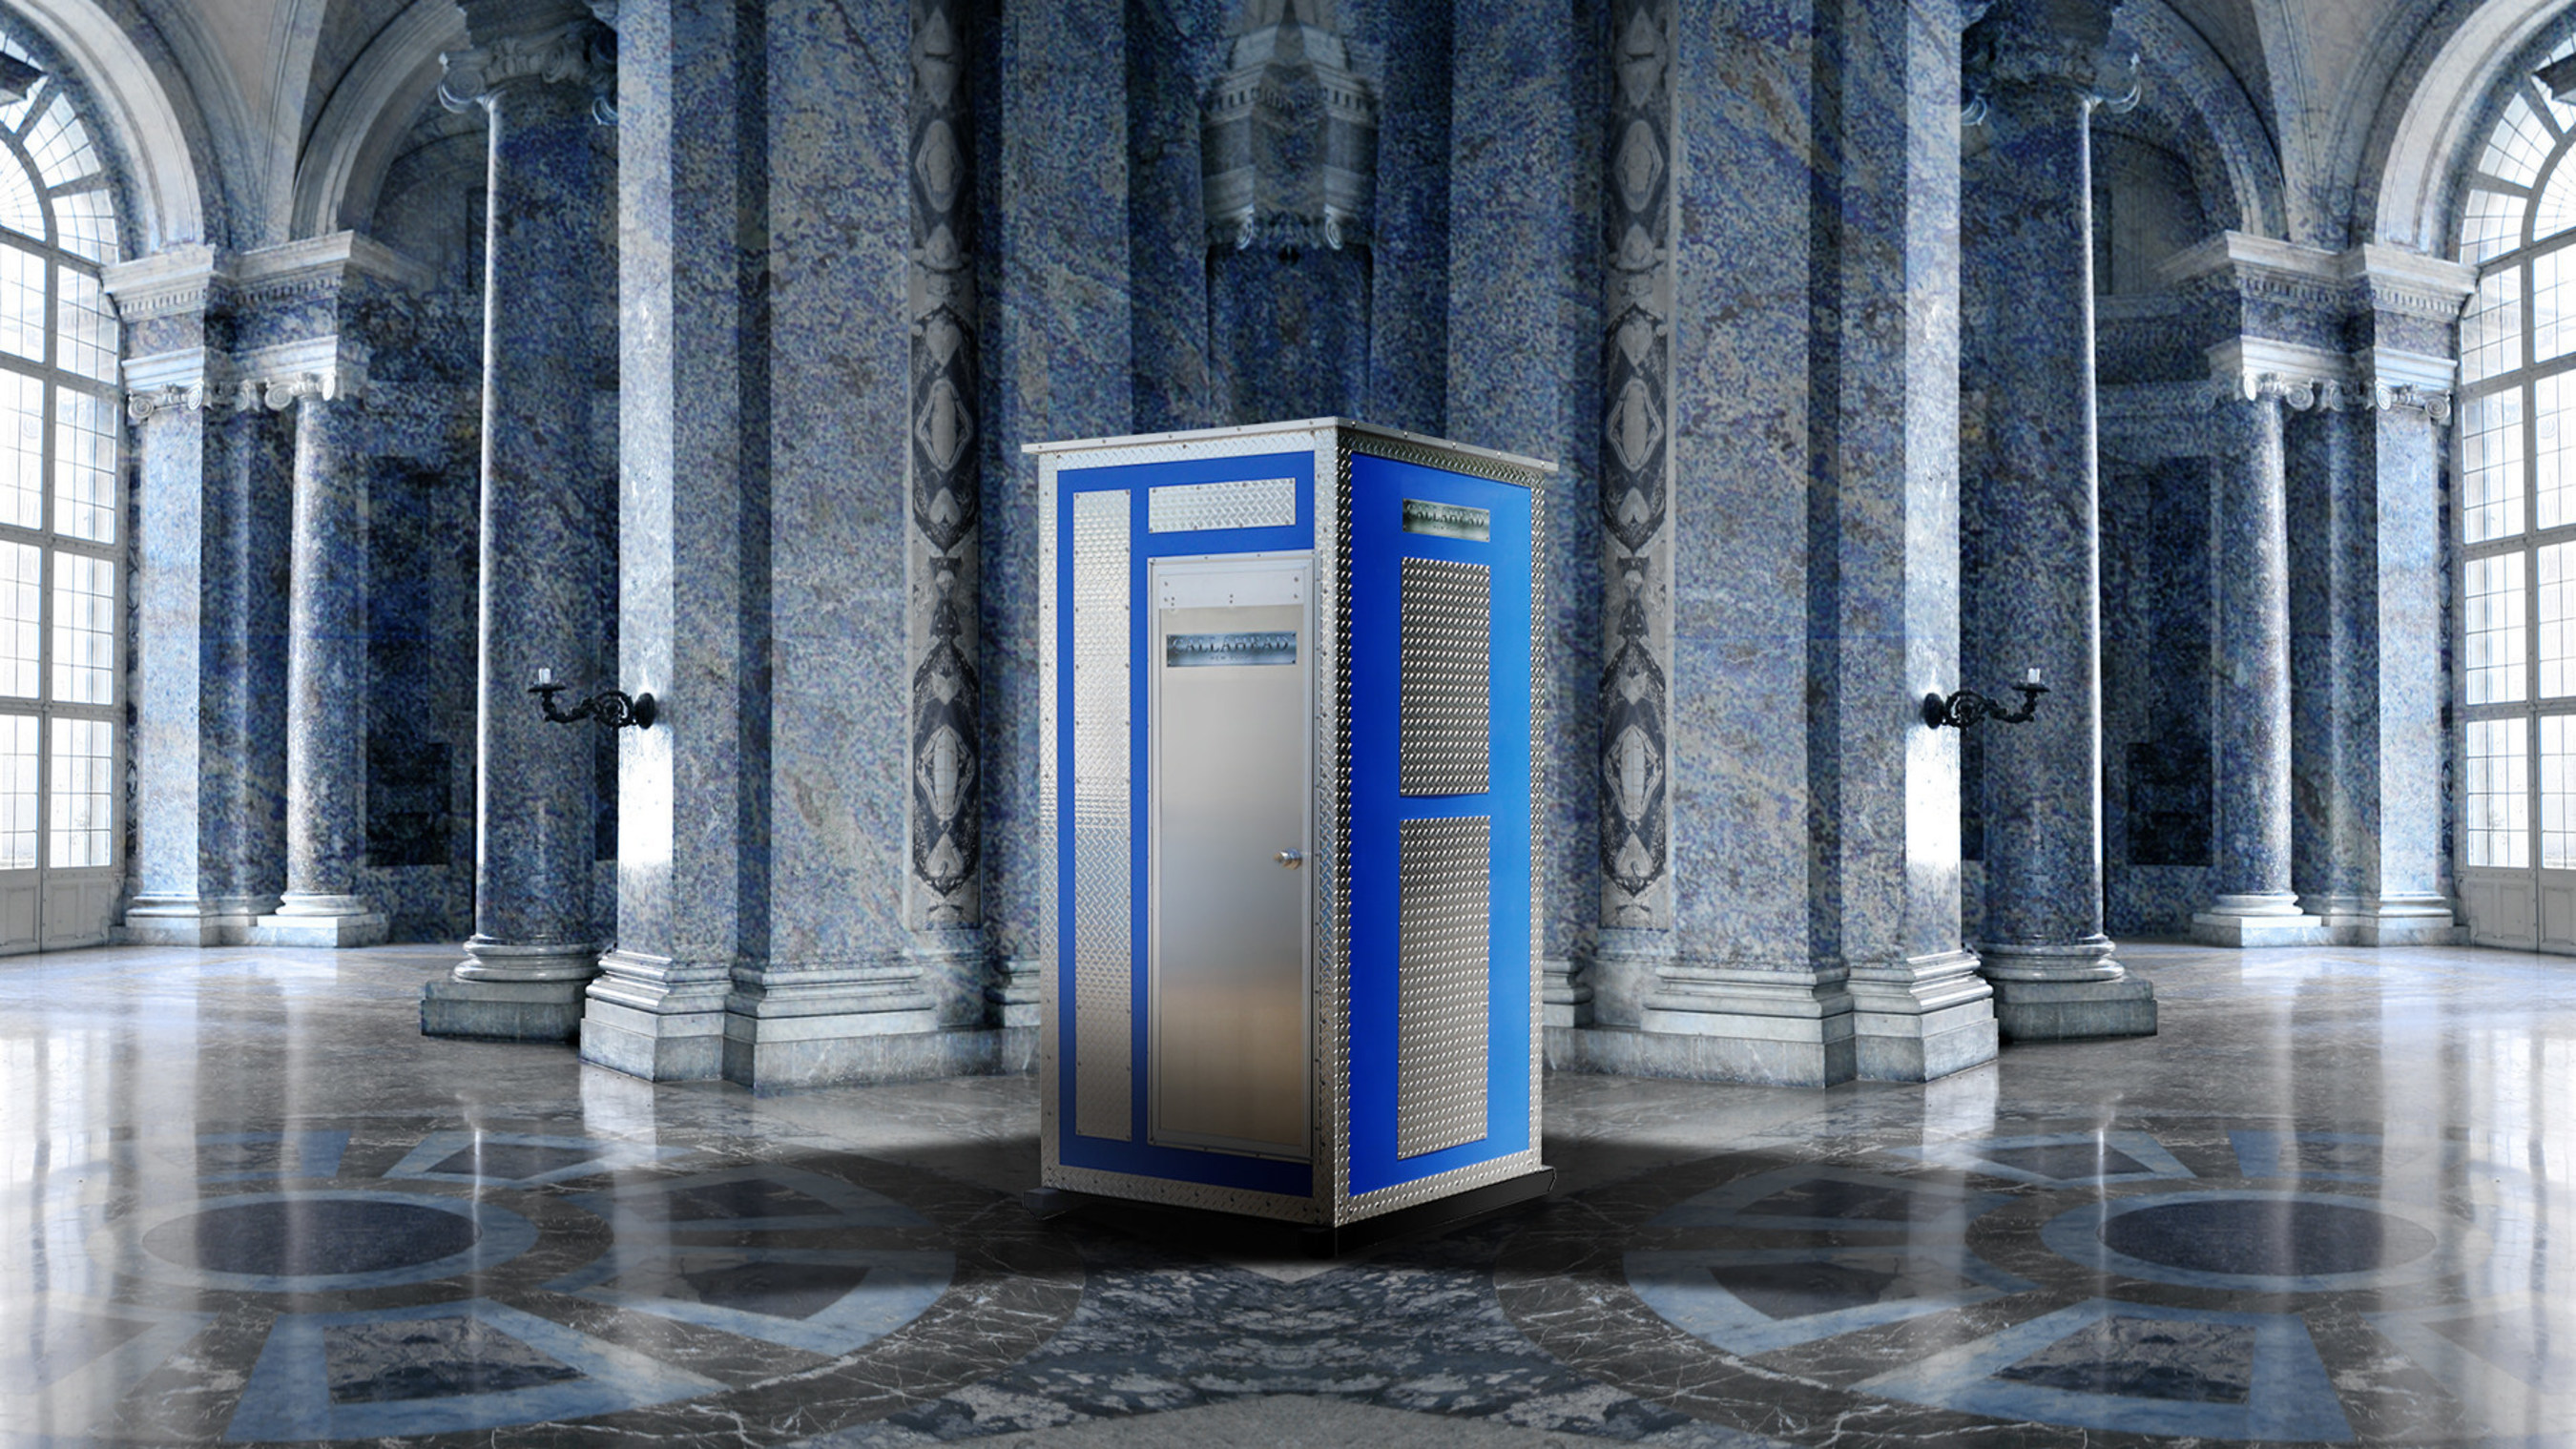 'The Waterloo' Portable Toilet by Callahead